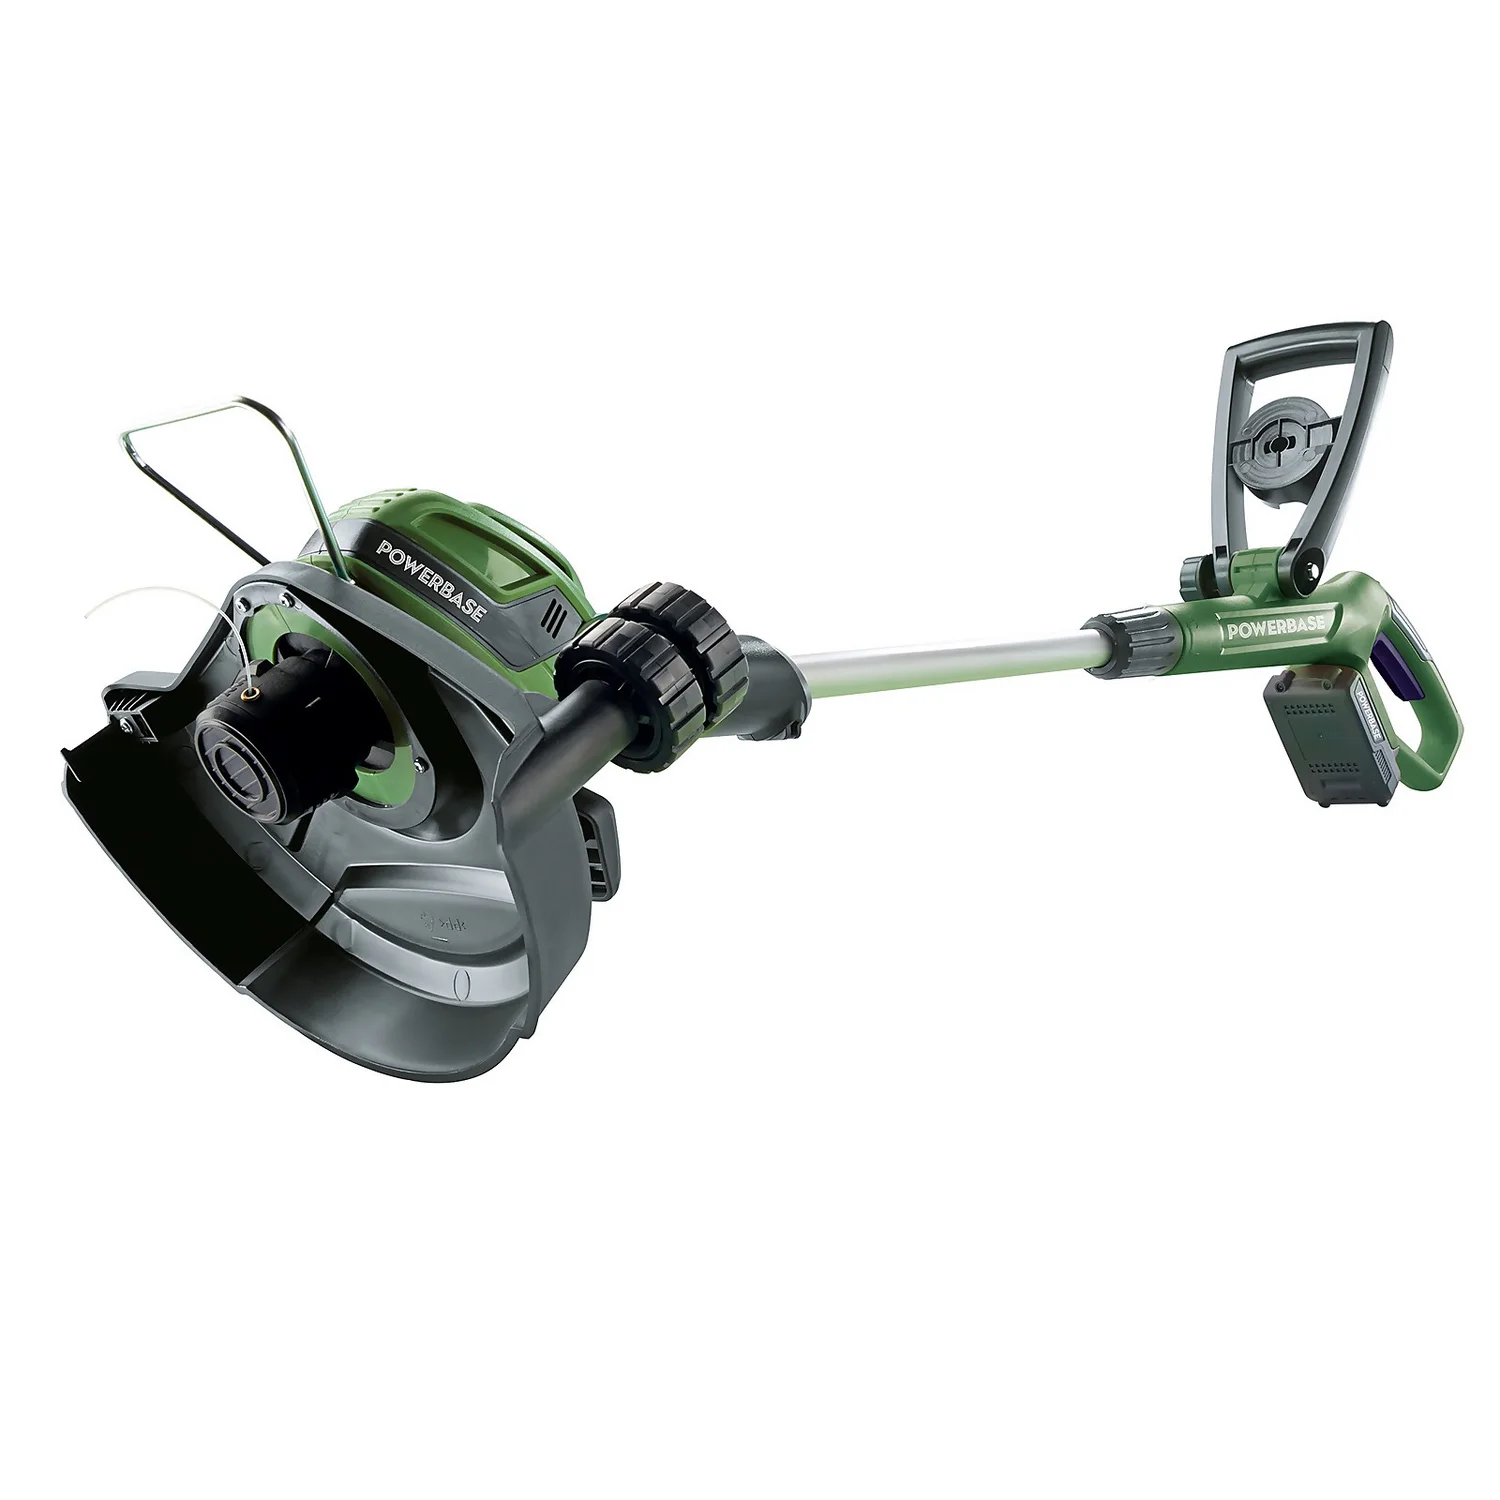 Image of Save &pound10: Powerbase 20V Cordless Grass Trimmer 30cm
